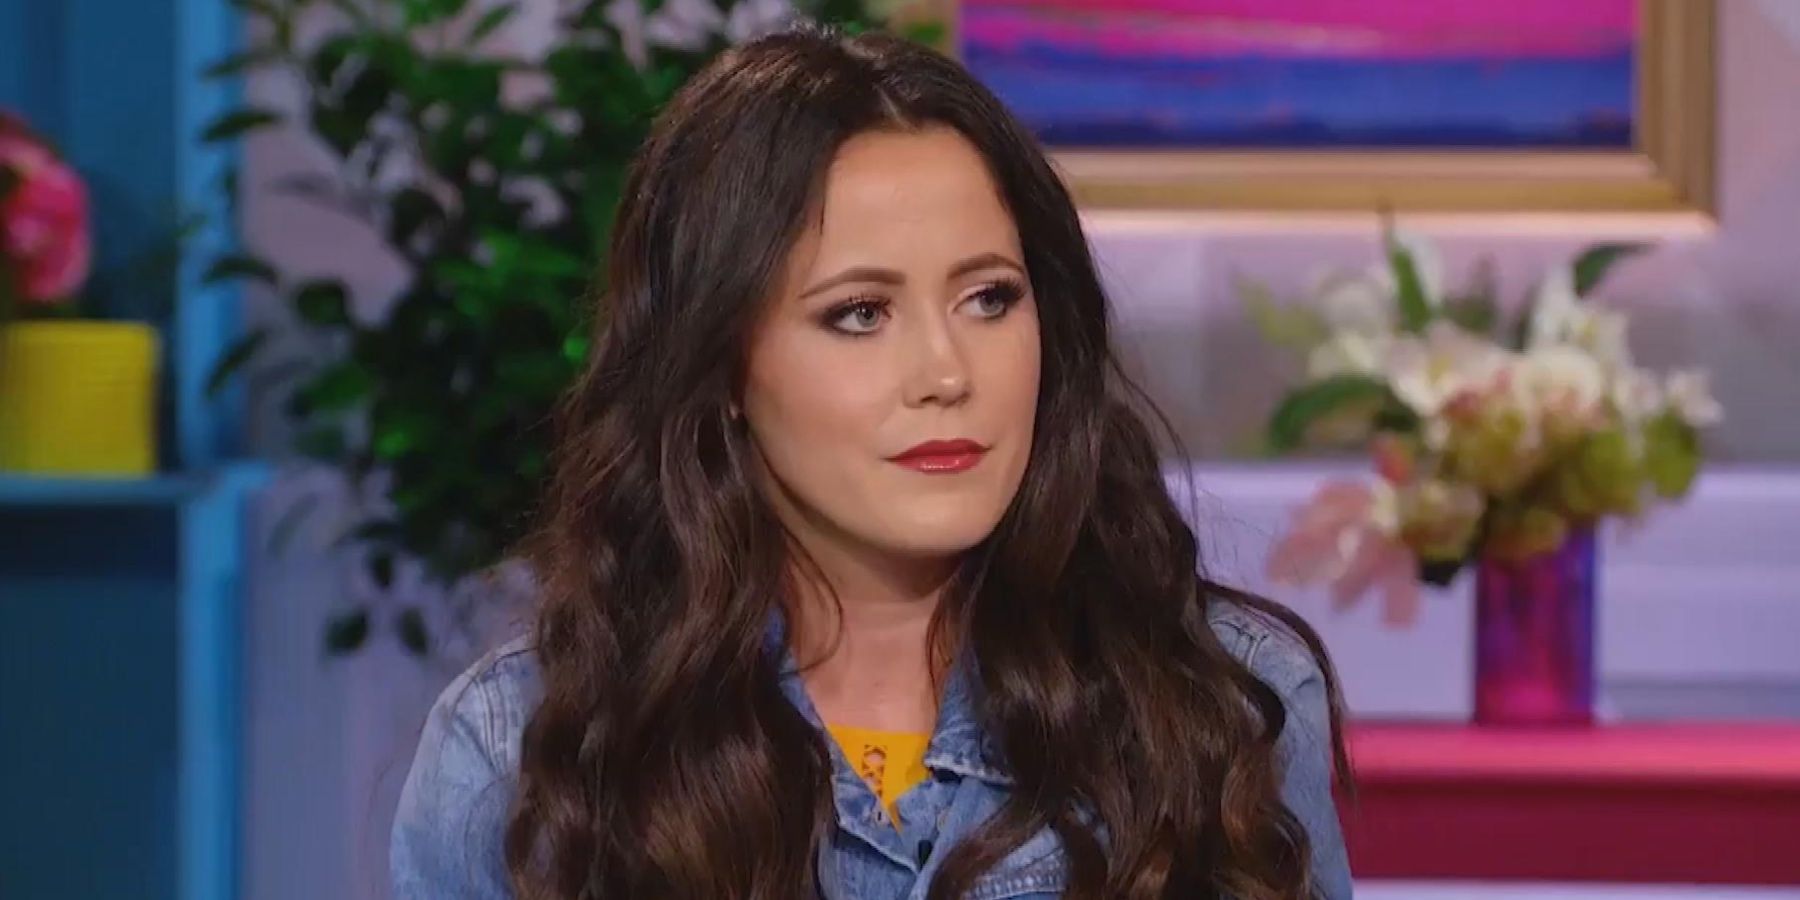 Teen Mom: Jenelle Raises Red Flags After Commenting on Her Pit Bull